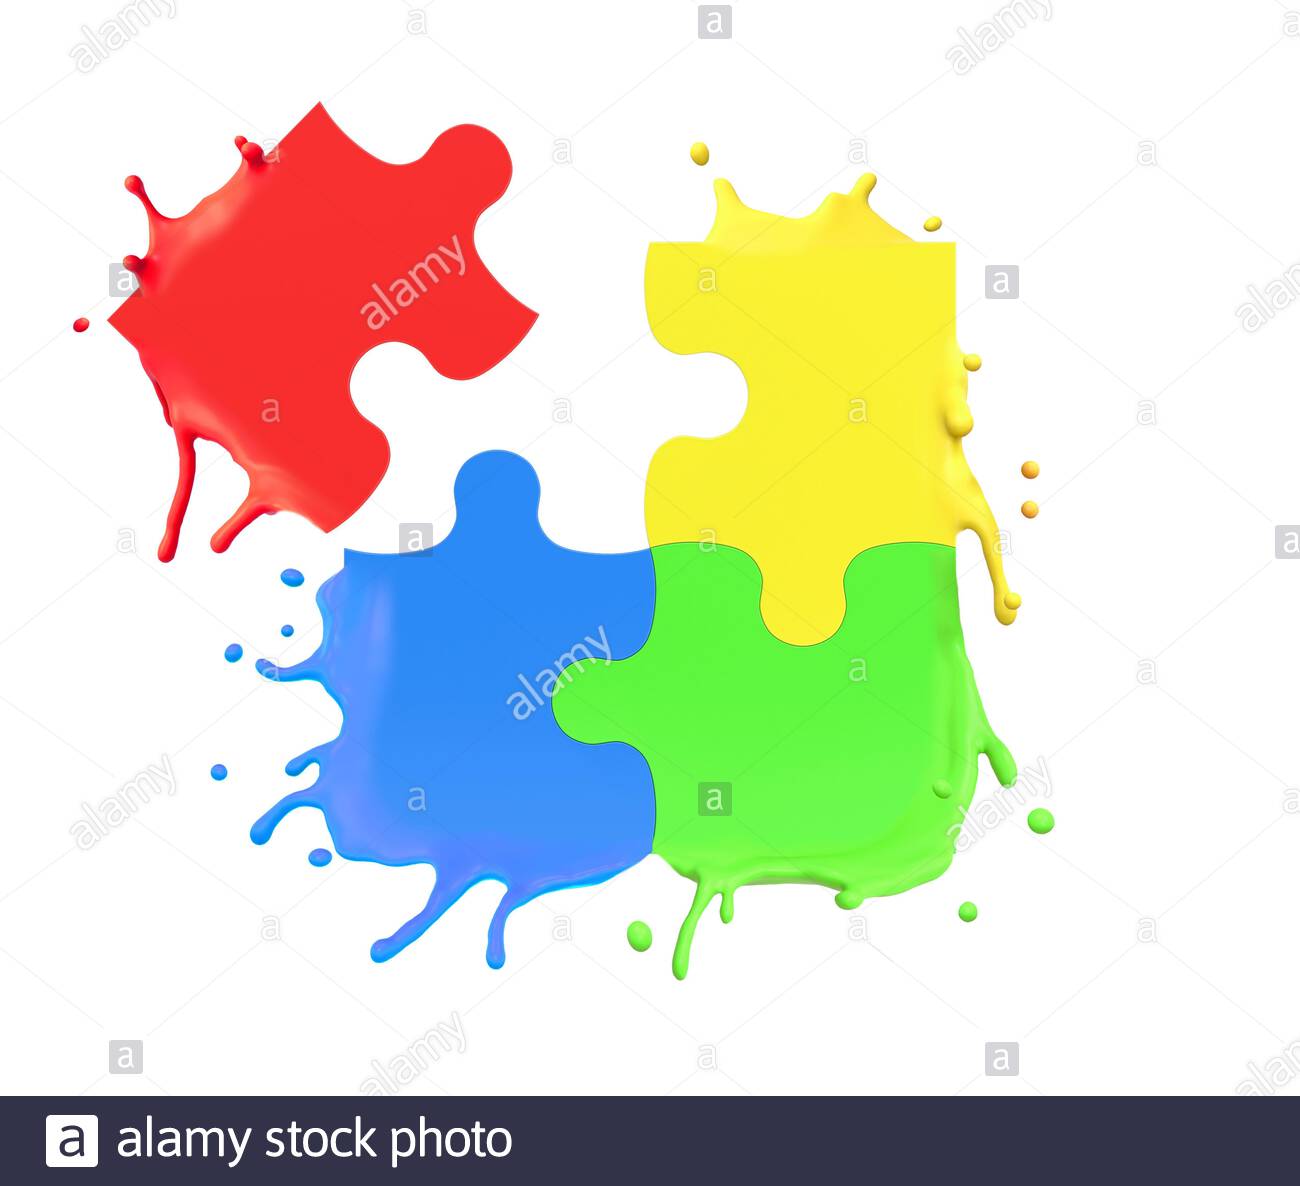 3d Rendering Of Colorful Puzzle Pieces Splashing Isolated On White